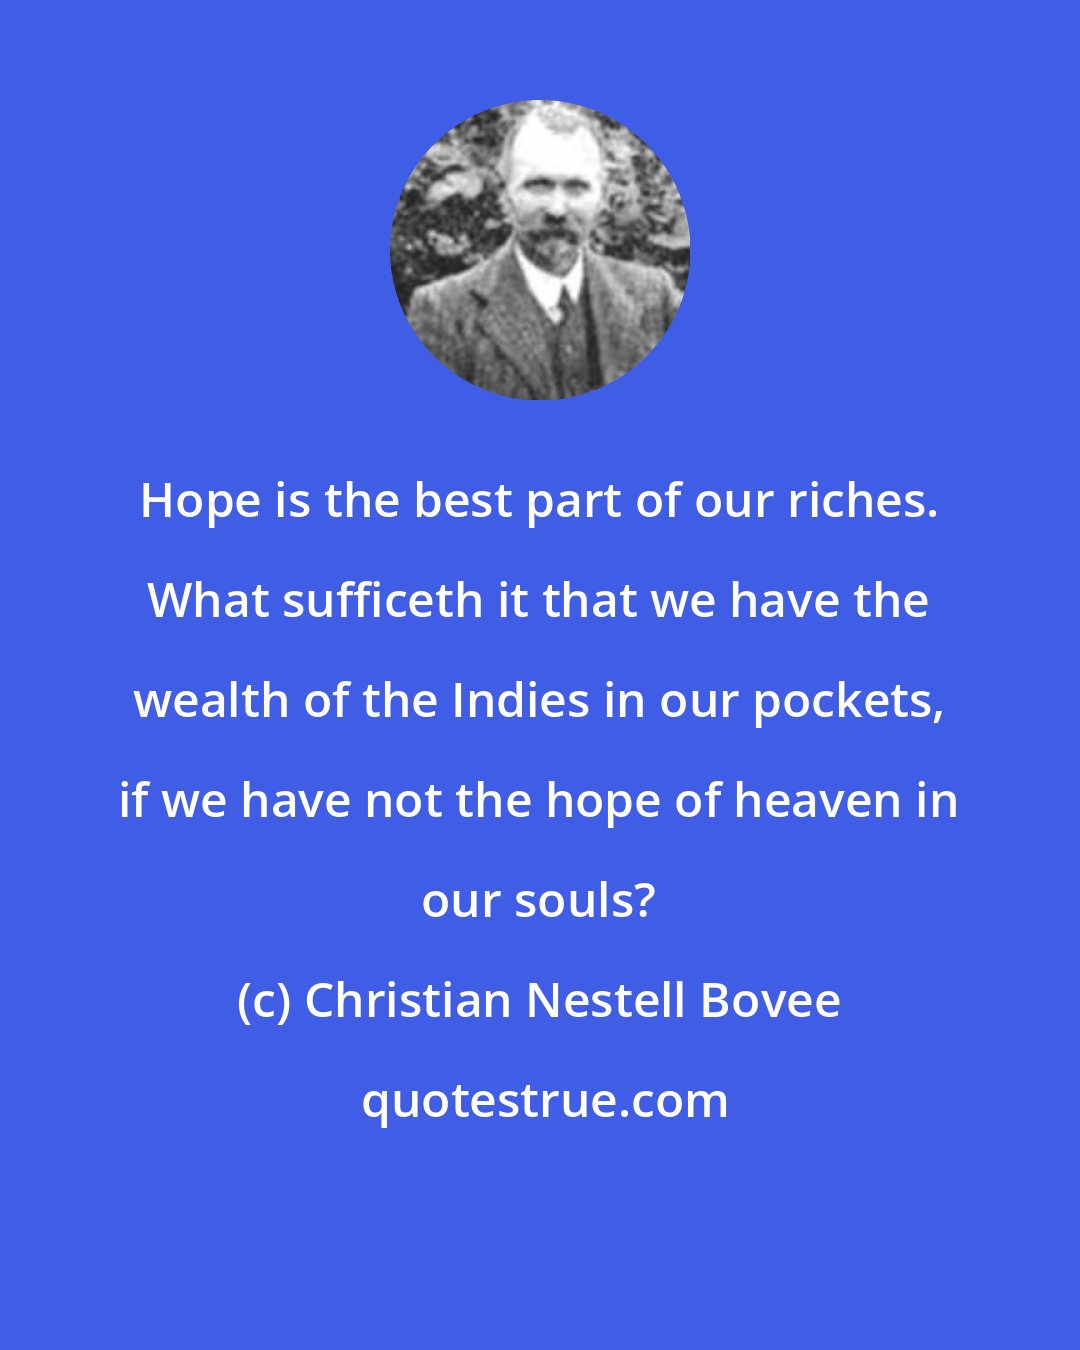 Christian Nestell Bovee: Hope is the best part of our riches. What sufficeth it that we have the wealth of the Indies in our pockets, if we have not the hope of heaven in our souls?